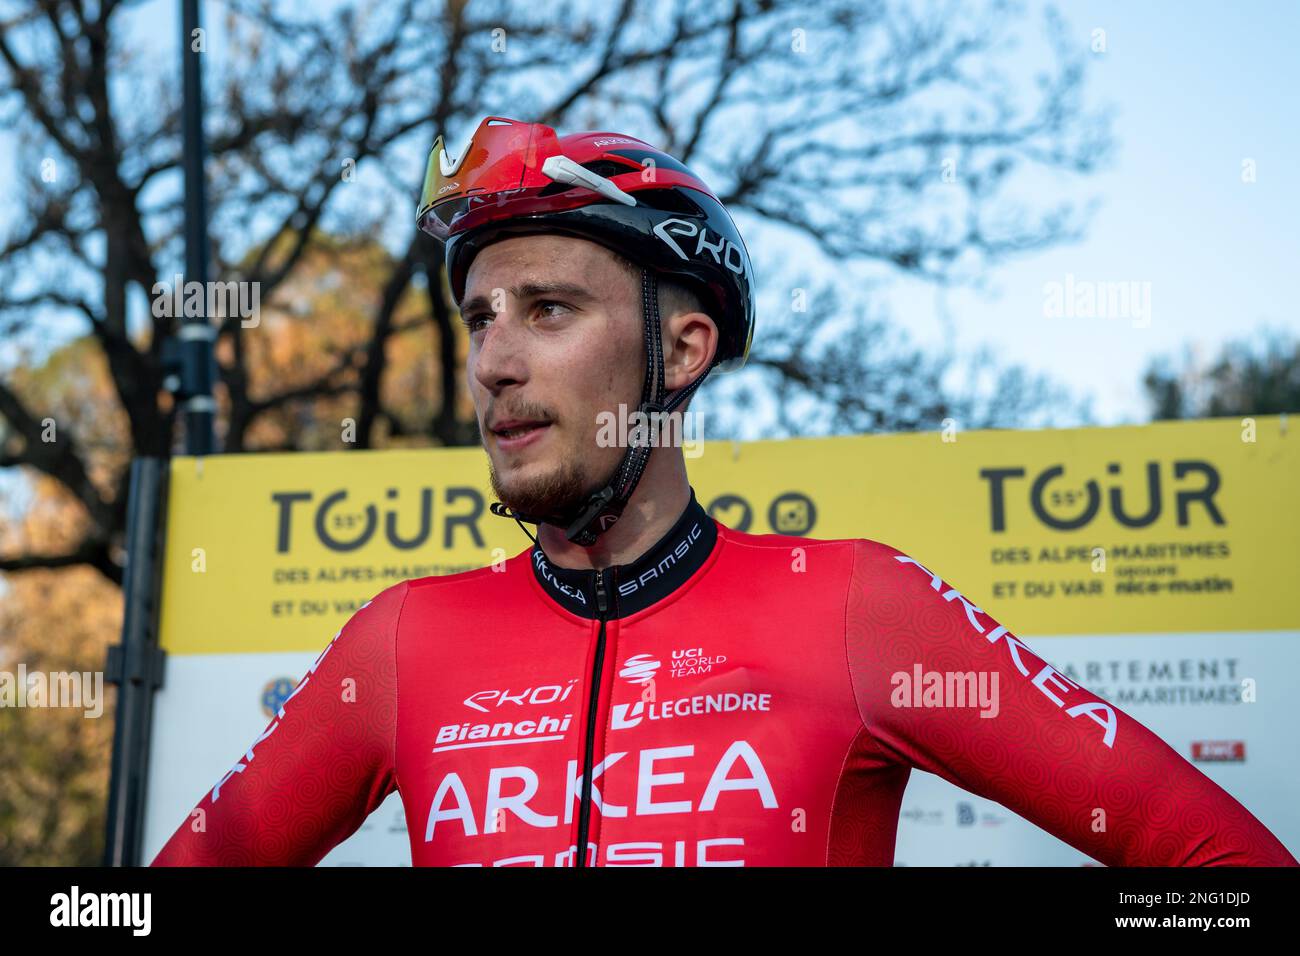 Ramatuelle, France. 17th Feb, 2023. Frenchman Kevin Vauquelin, Arkea Samsic team talks to the press after his victory The first stage of the Tour 06-83 (Tour des Alpes-maritimes et du Var) 2023 takes place between Saint-Raphael and Ramatuelle. The winner was Kevin Vauquelin (team Arkea Samsic) who finished ahead of Neilson Pawless (team EF Education-EasyPost) in second place and Kevin Geniets (team Groupama-FDJ) in third place. Credit: SOPA Images Limited/Alamy Live News Stock Photo